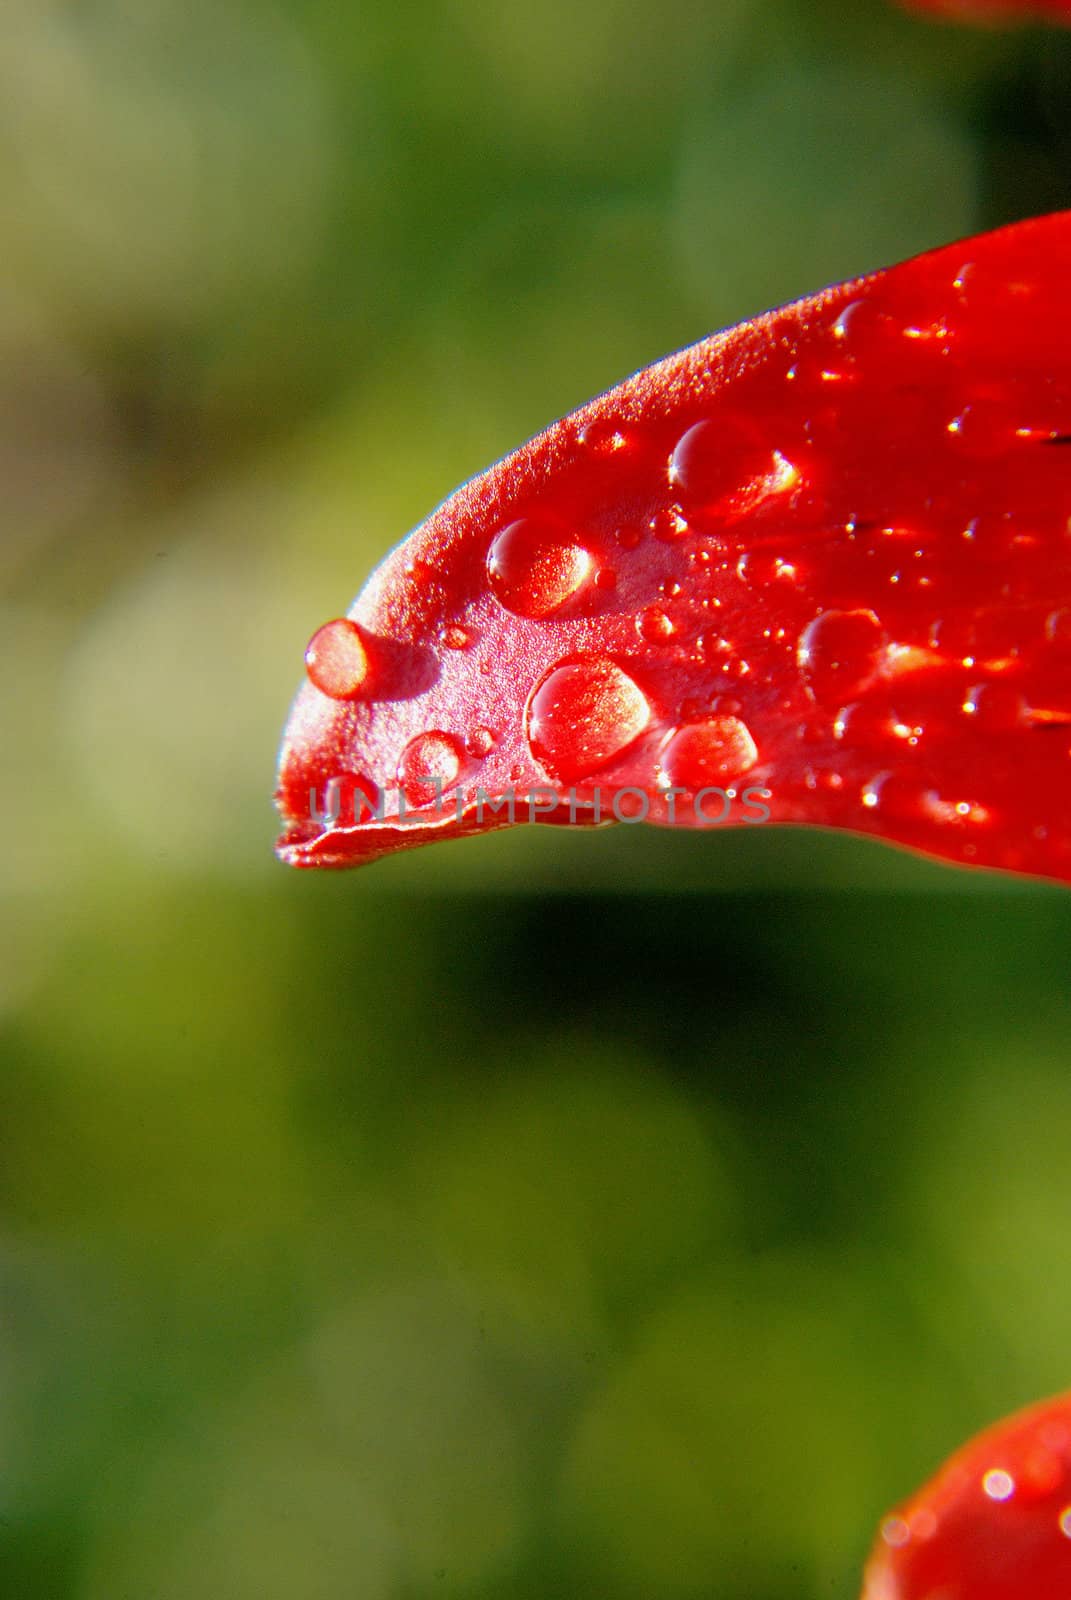 Awesome red leaf covered by some little dewdrops.